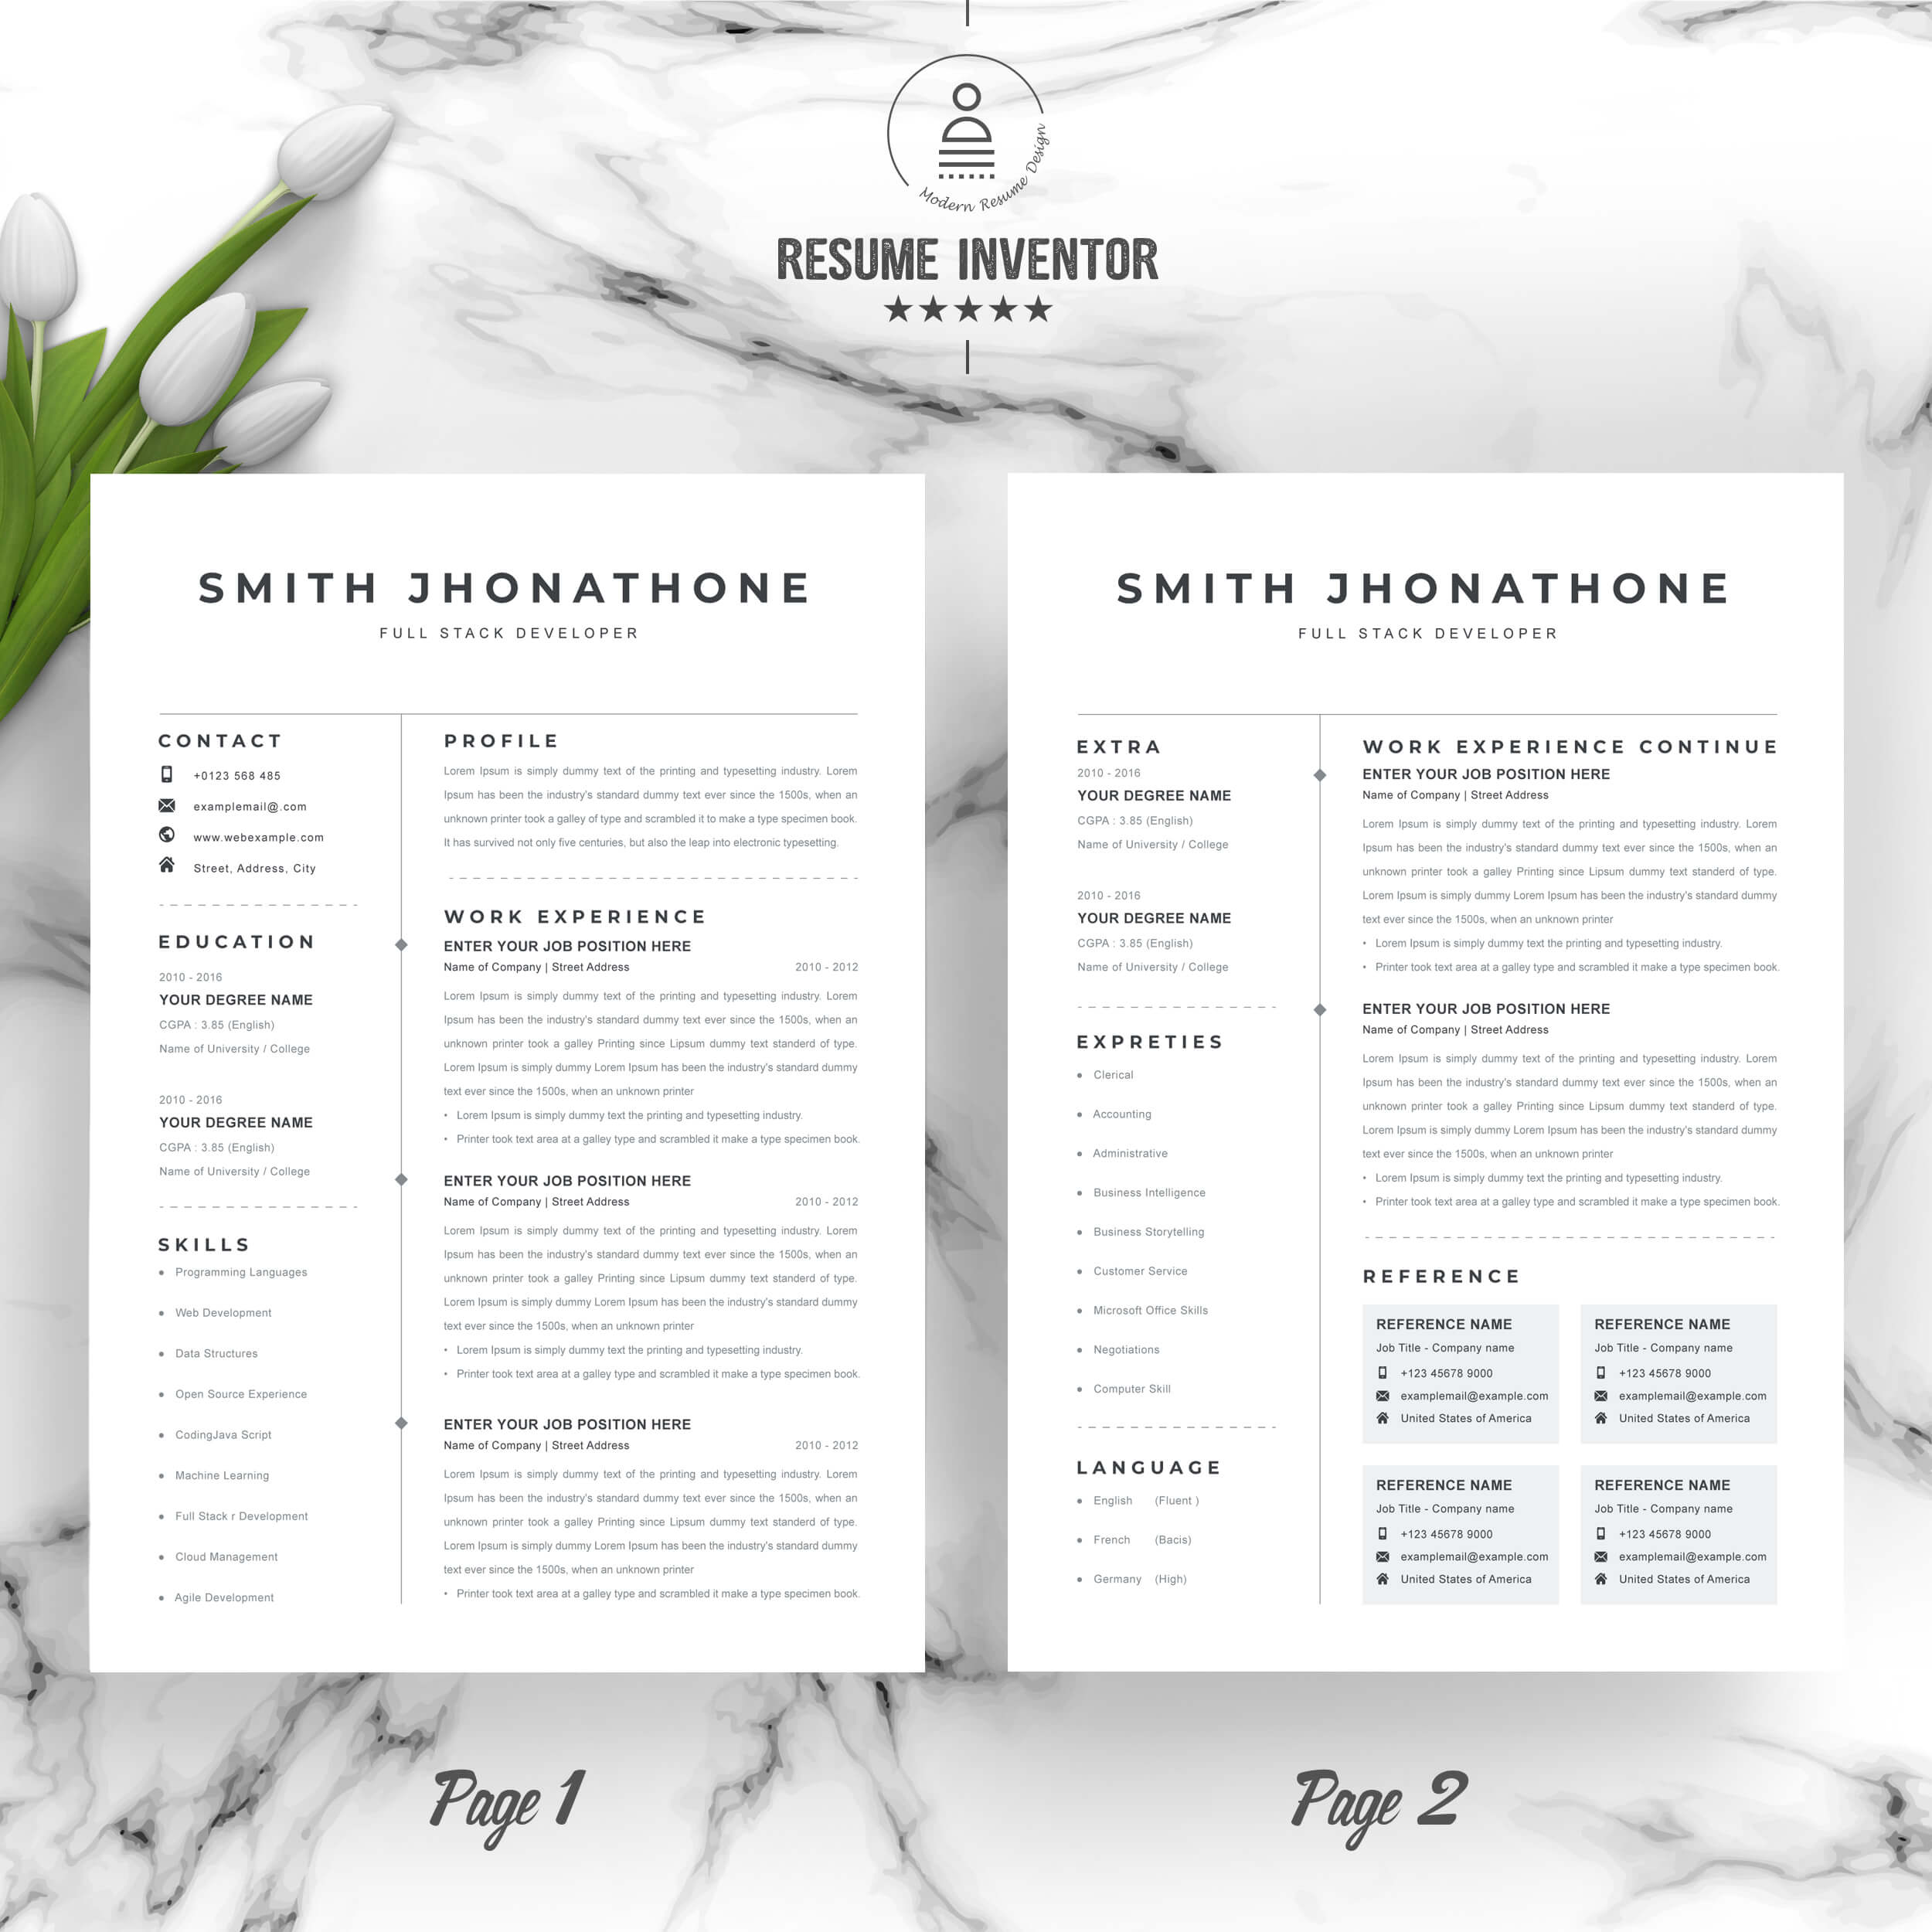 Clean and Elegant Resume Template for Creative Professionals in Design, Advertising, and Media Industries preview image.